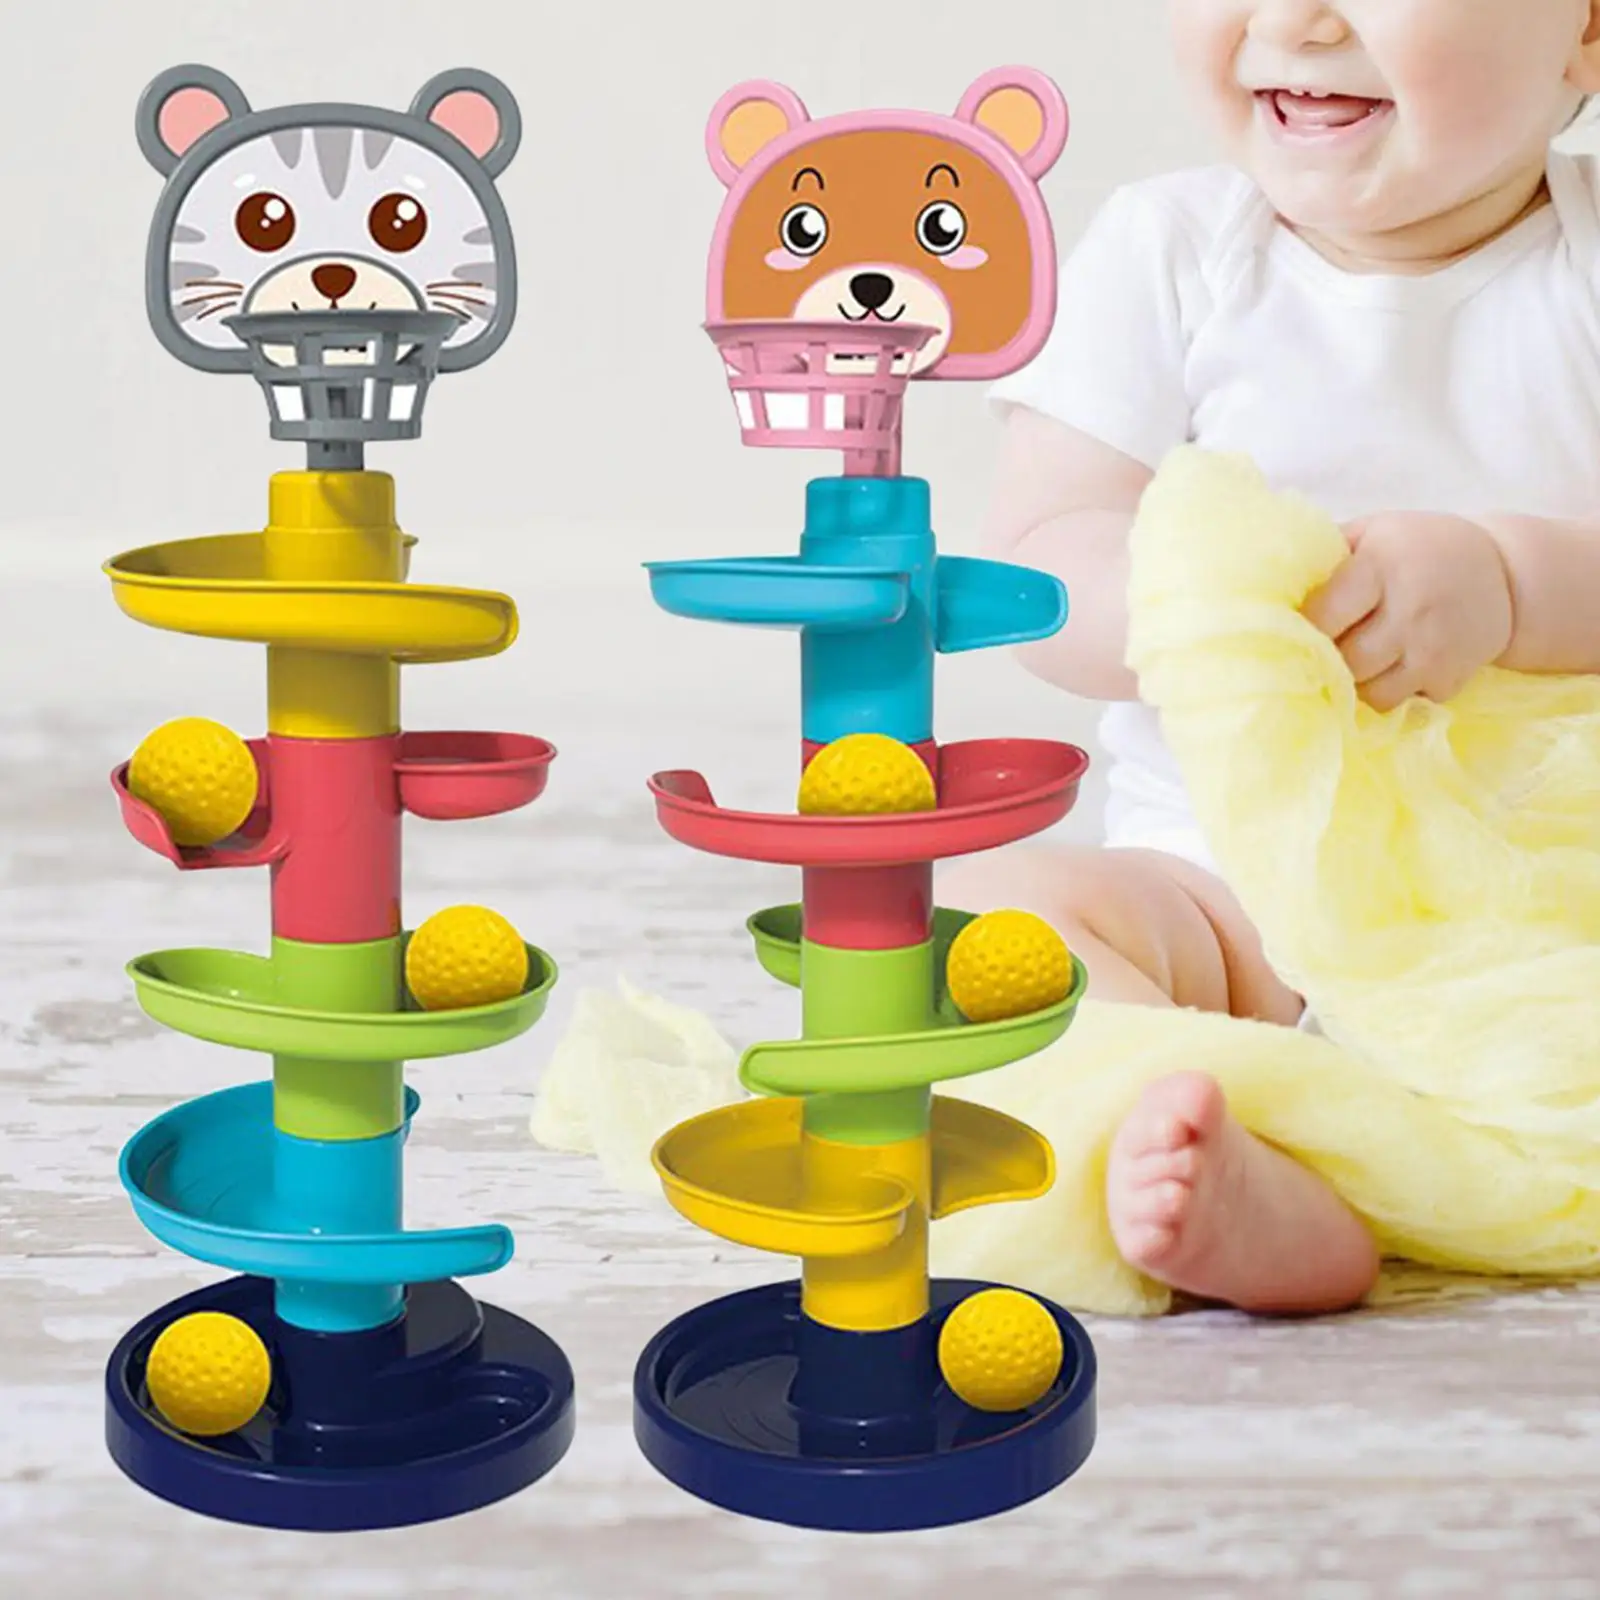 5 Tiers Ball Drop Swirling Ramp Toys Preschool Learning Development Montessori Early Educational Toys for Toddler Kids Baby